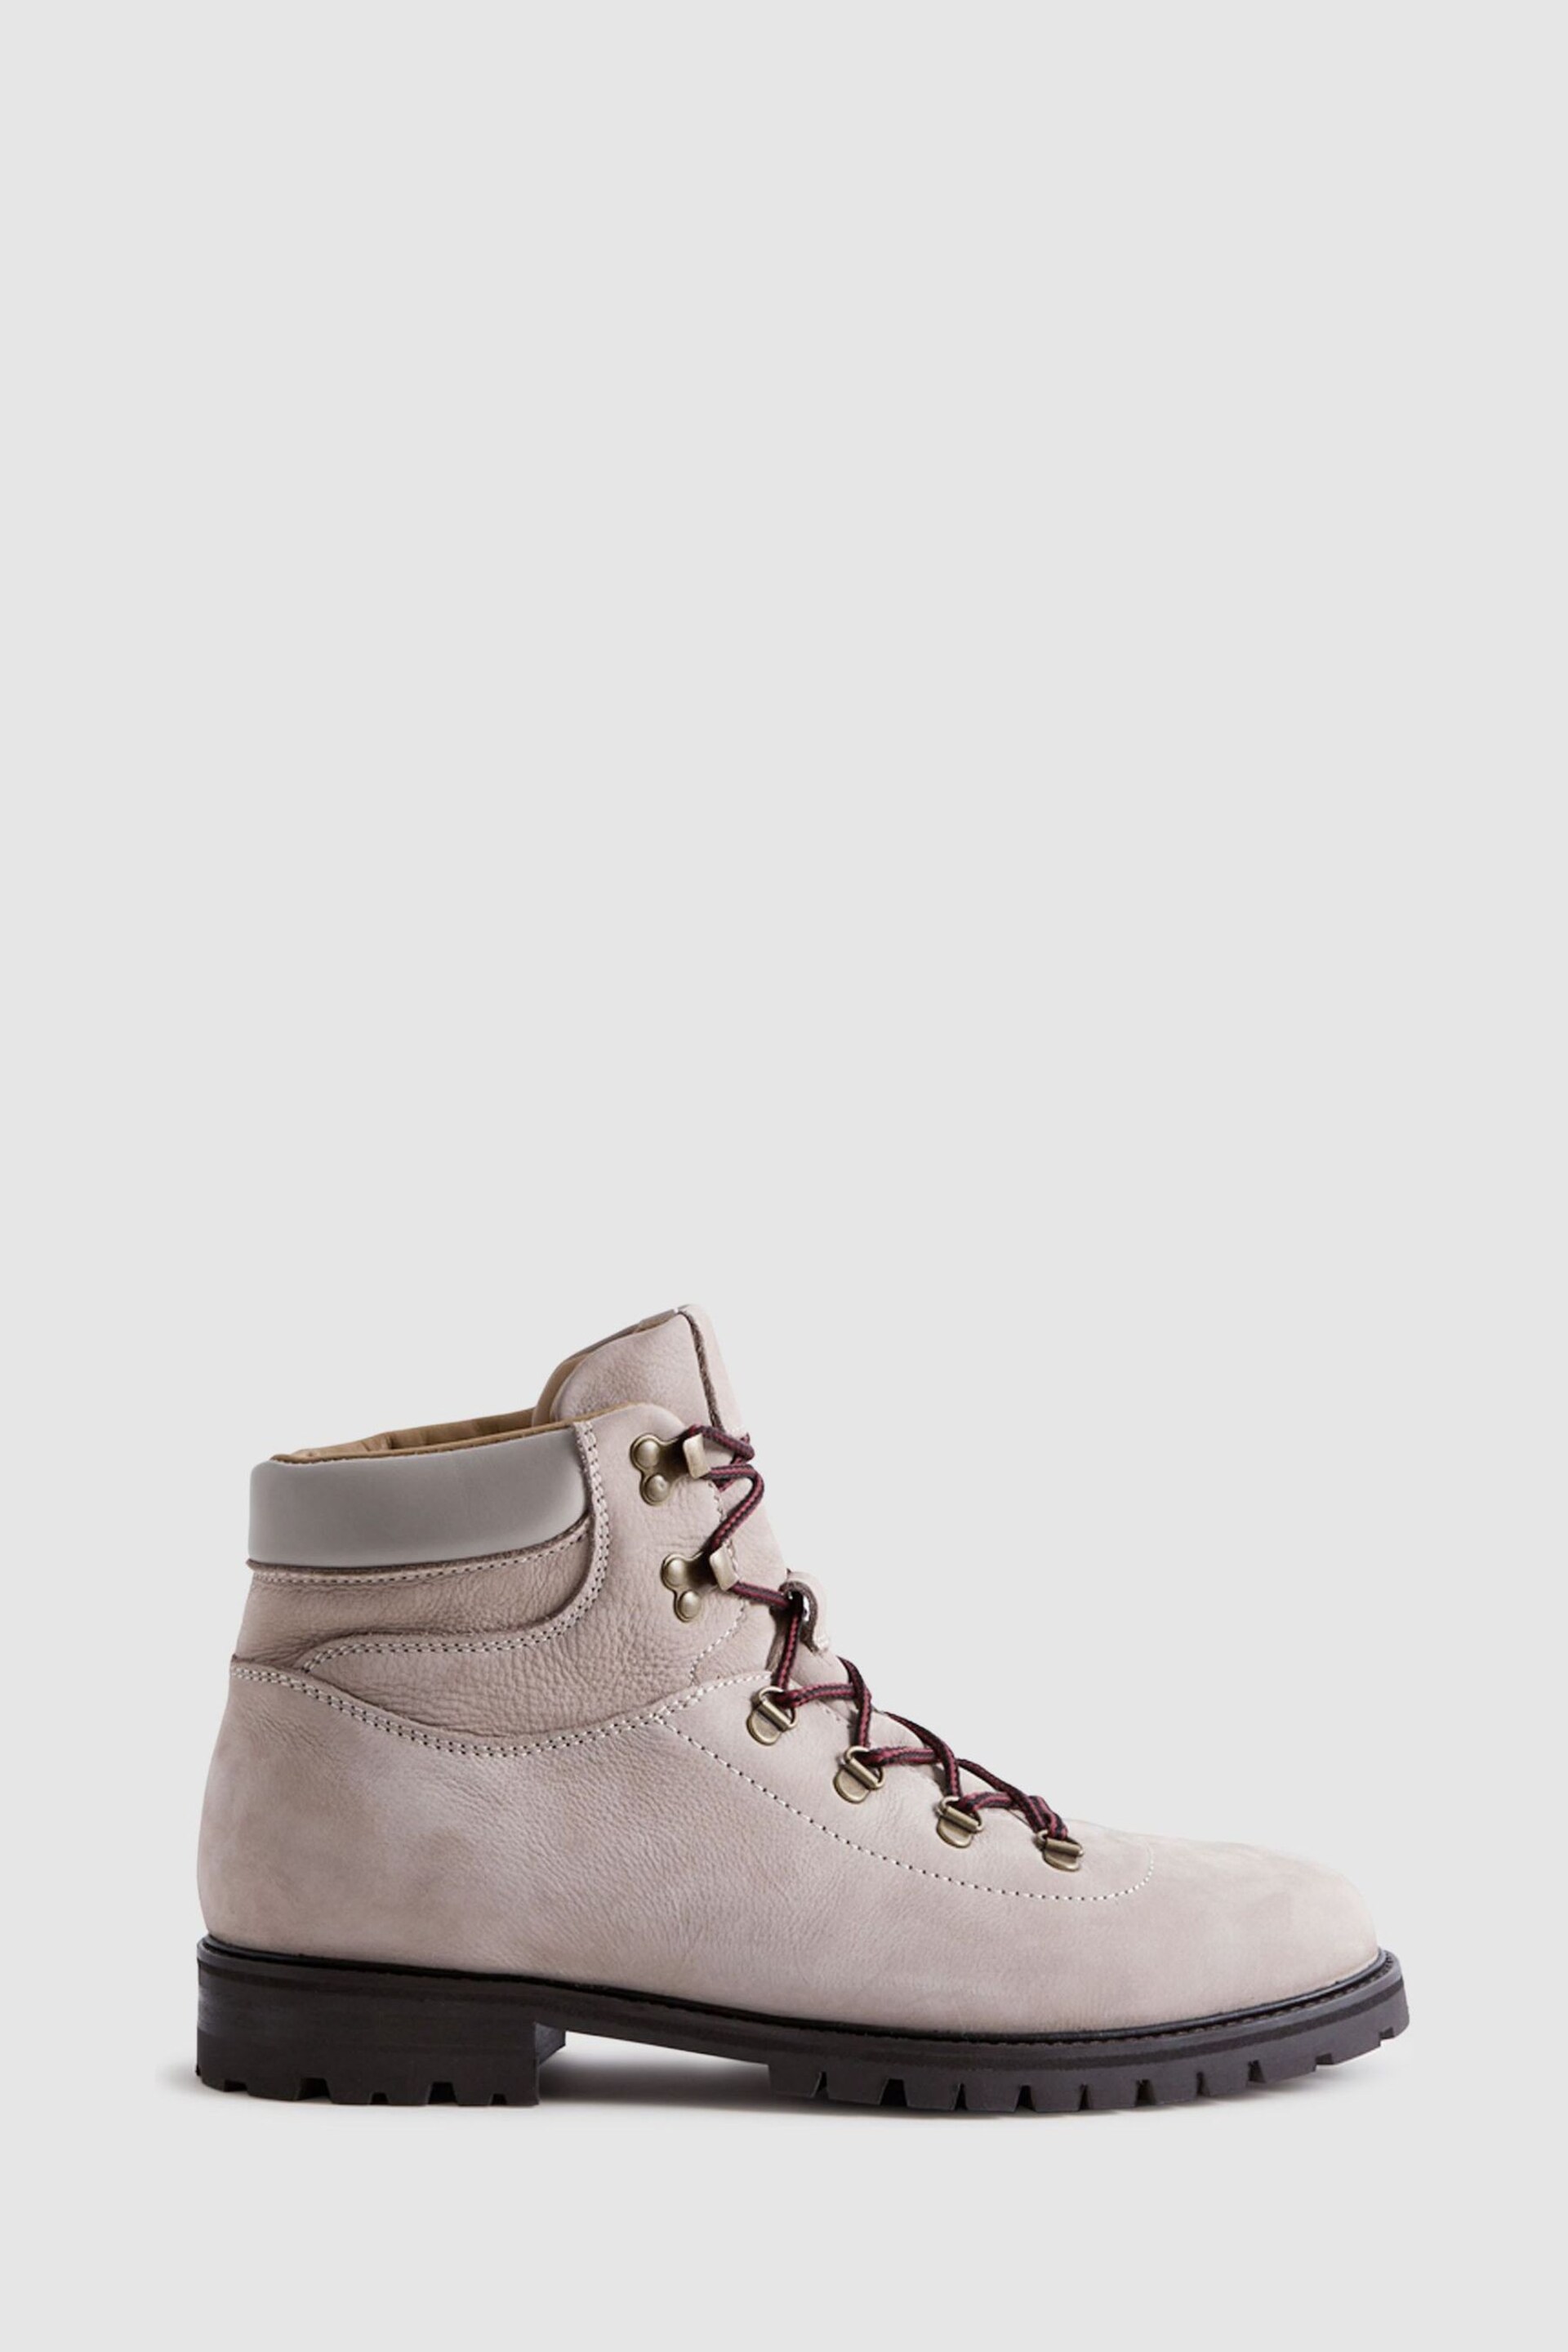 Reiss Stone Ashdown Leather Hiking Boots - Image 1 of 6